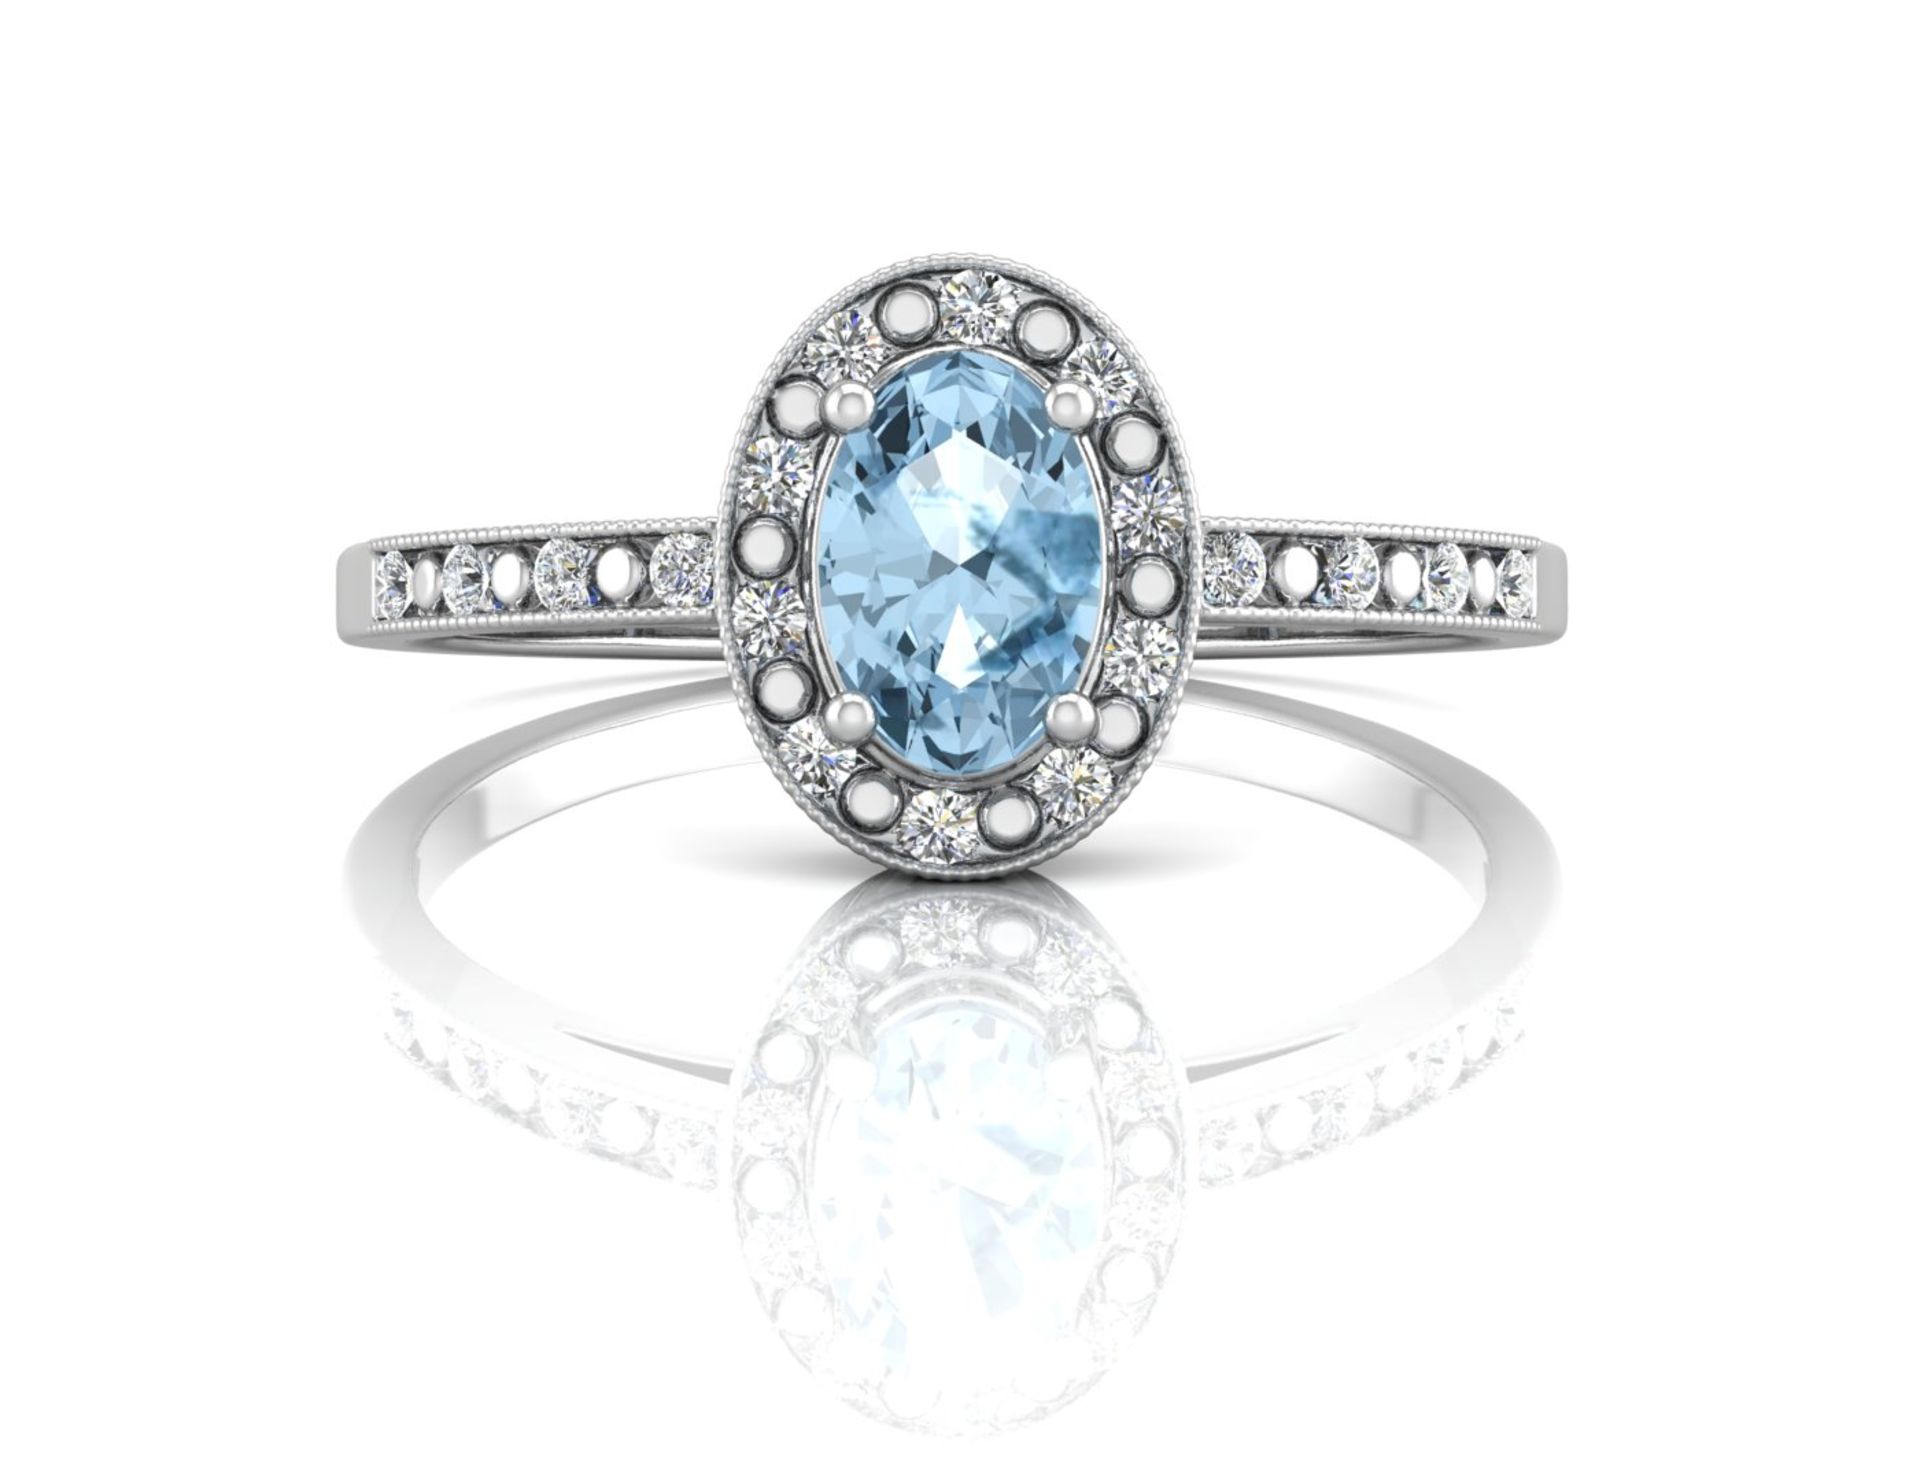 9ct White Gold Oval Cluster Diamond And Blue Topaz Ring 0.09 Carats - Image 4 of 4